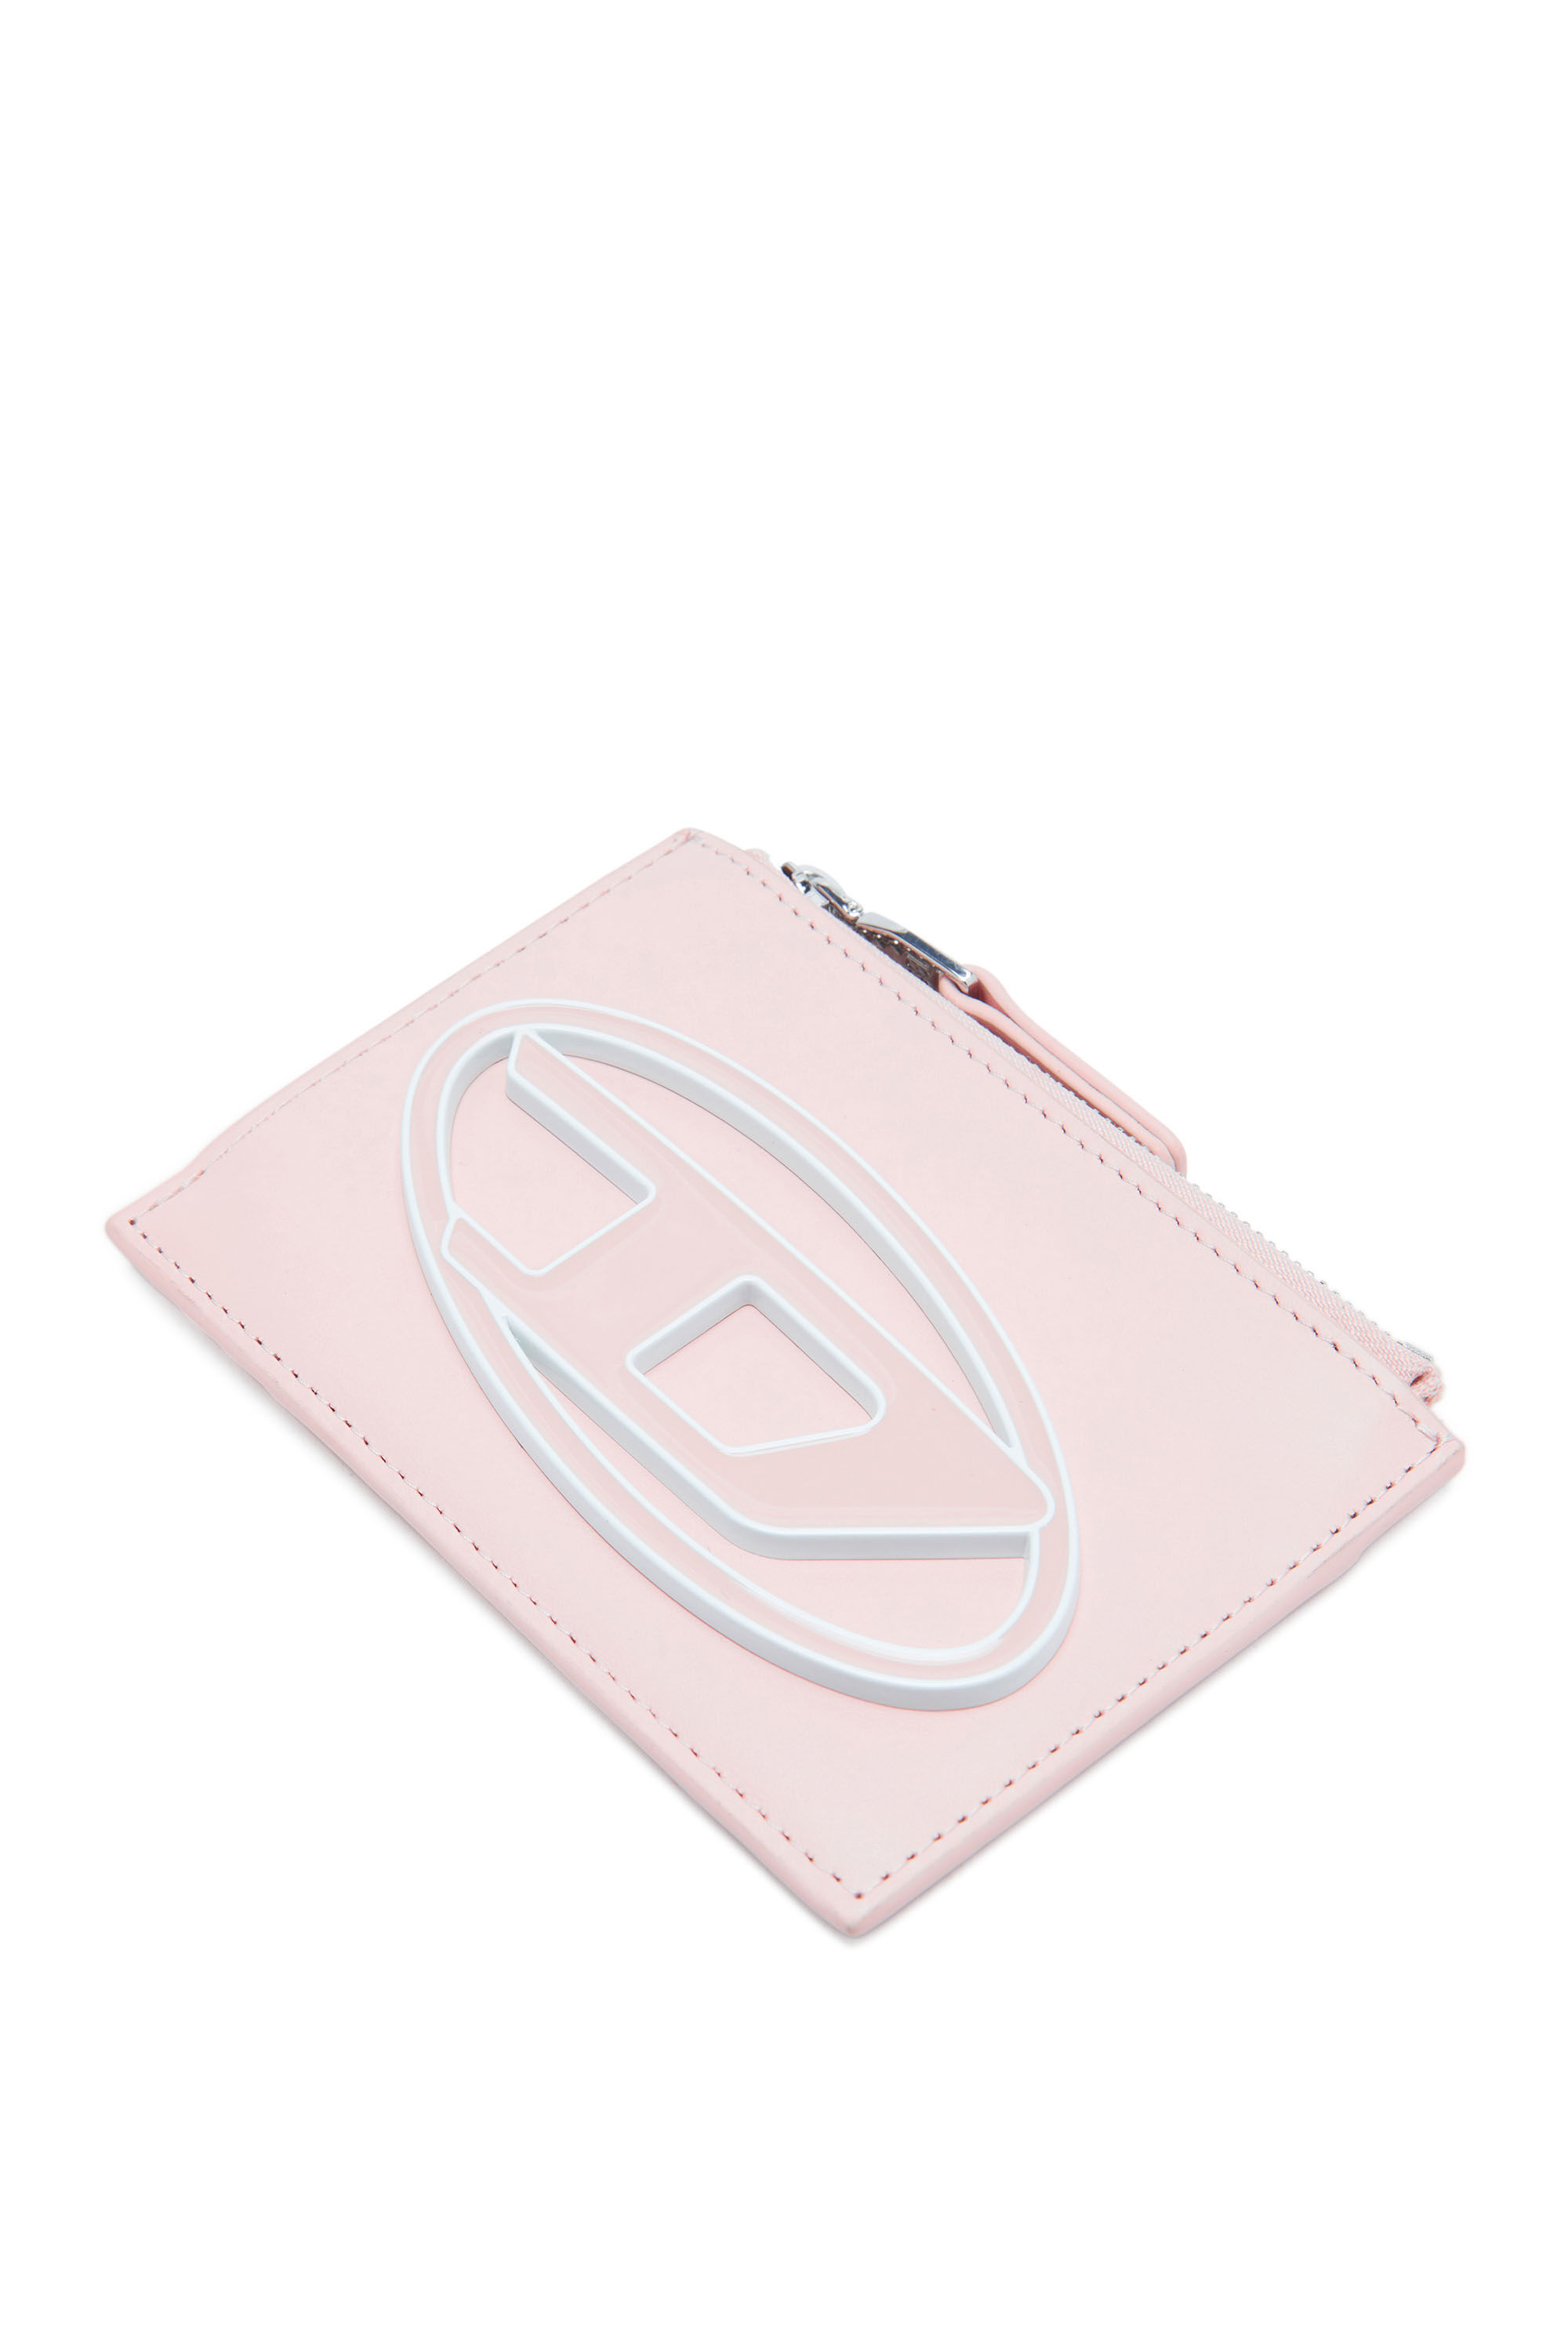 Diesel - 1DR CARD HOLDER I, Woman Card holder in pastel leather in Pink - Image 4